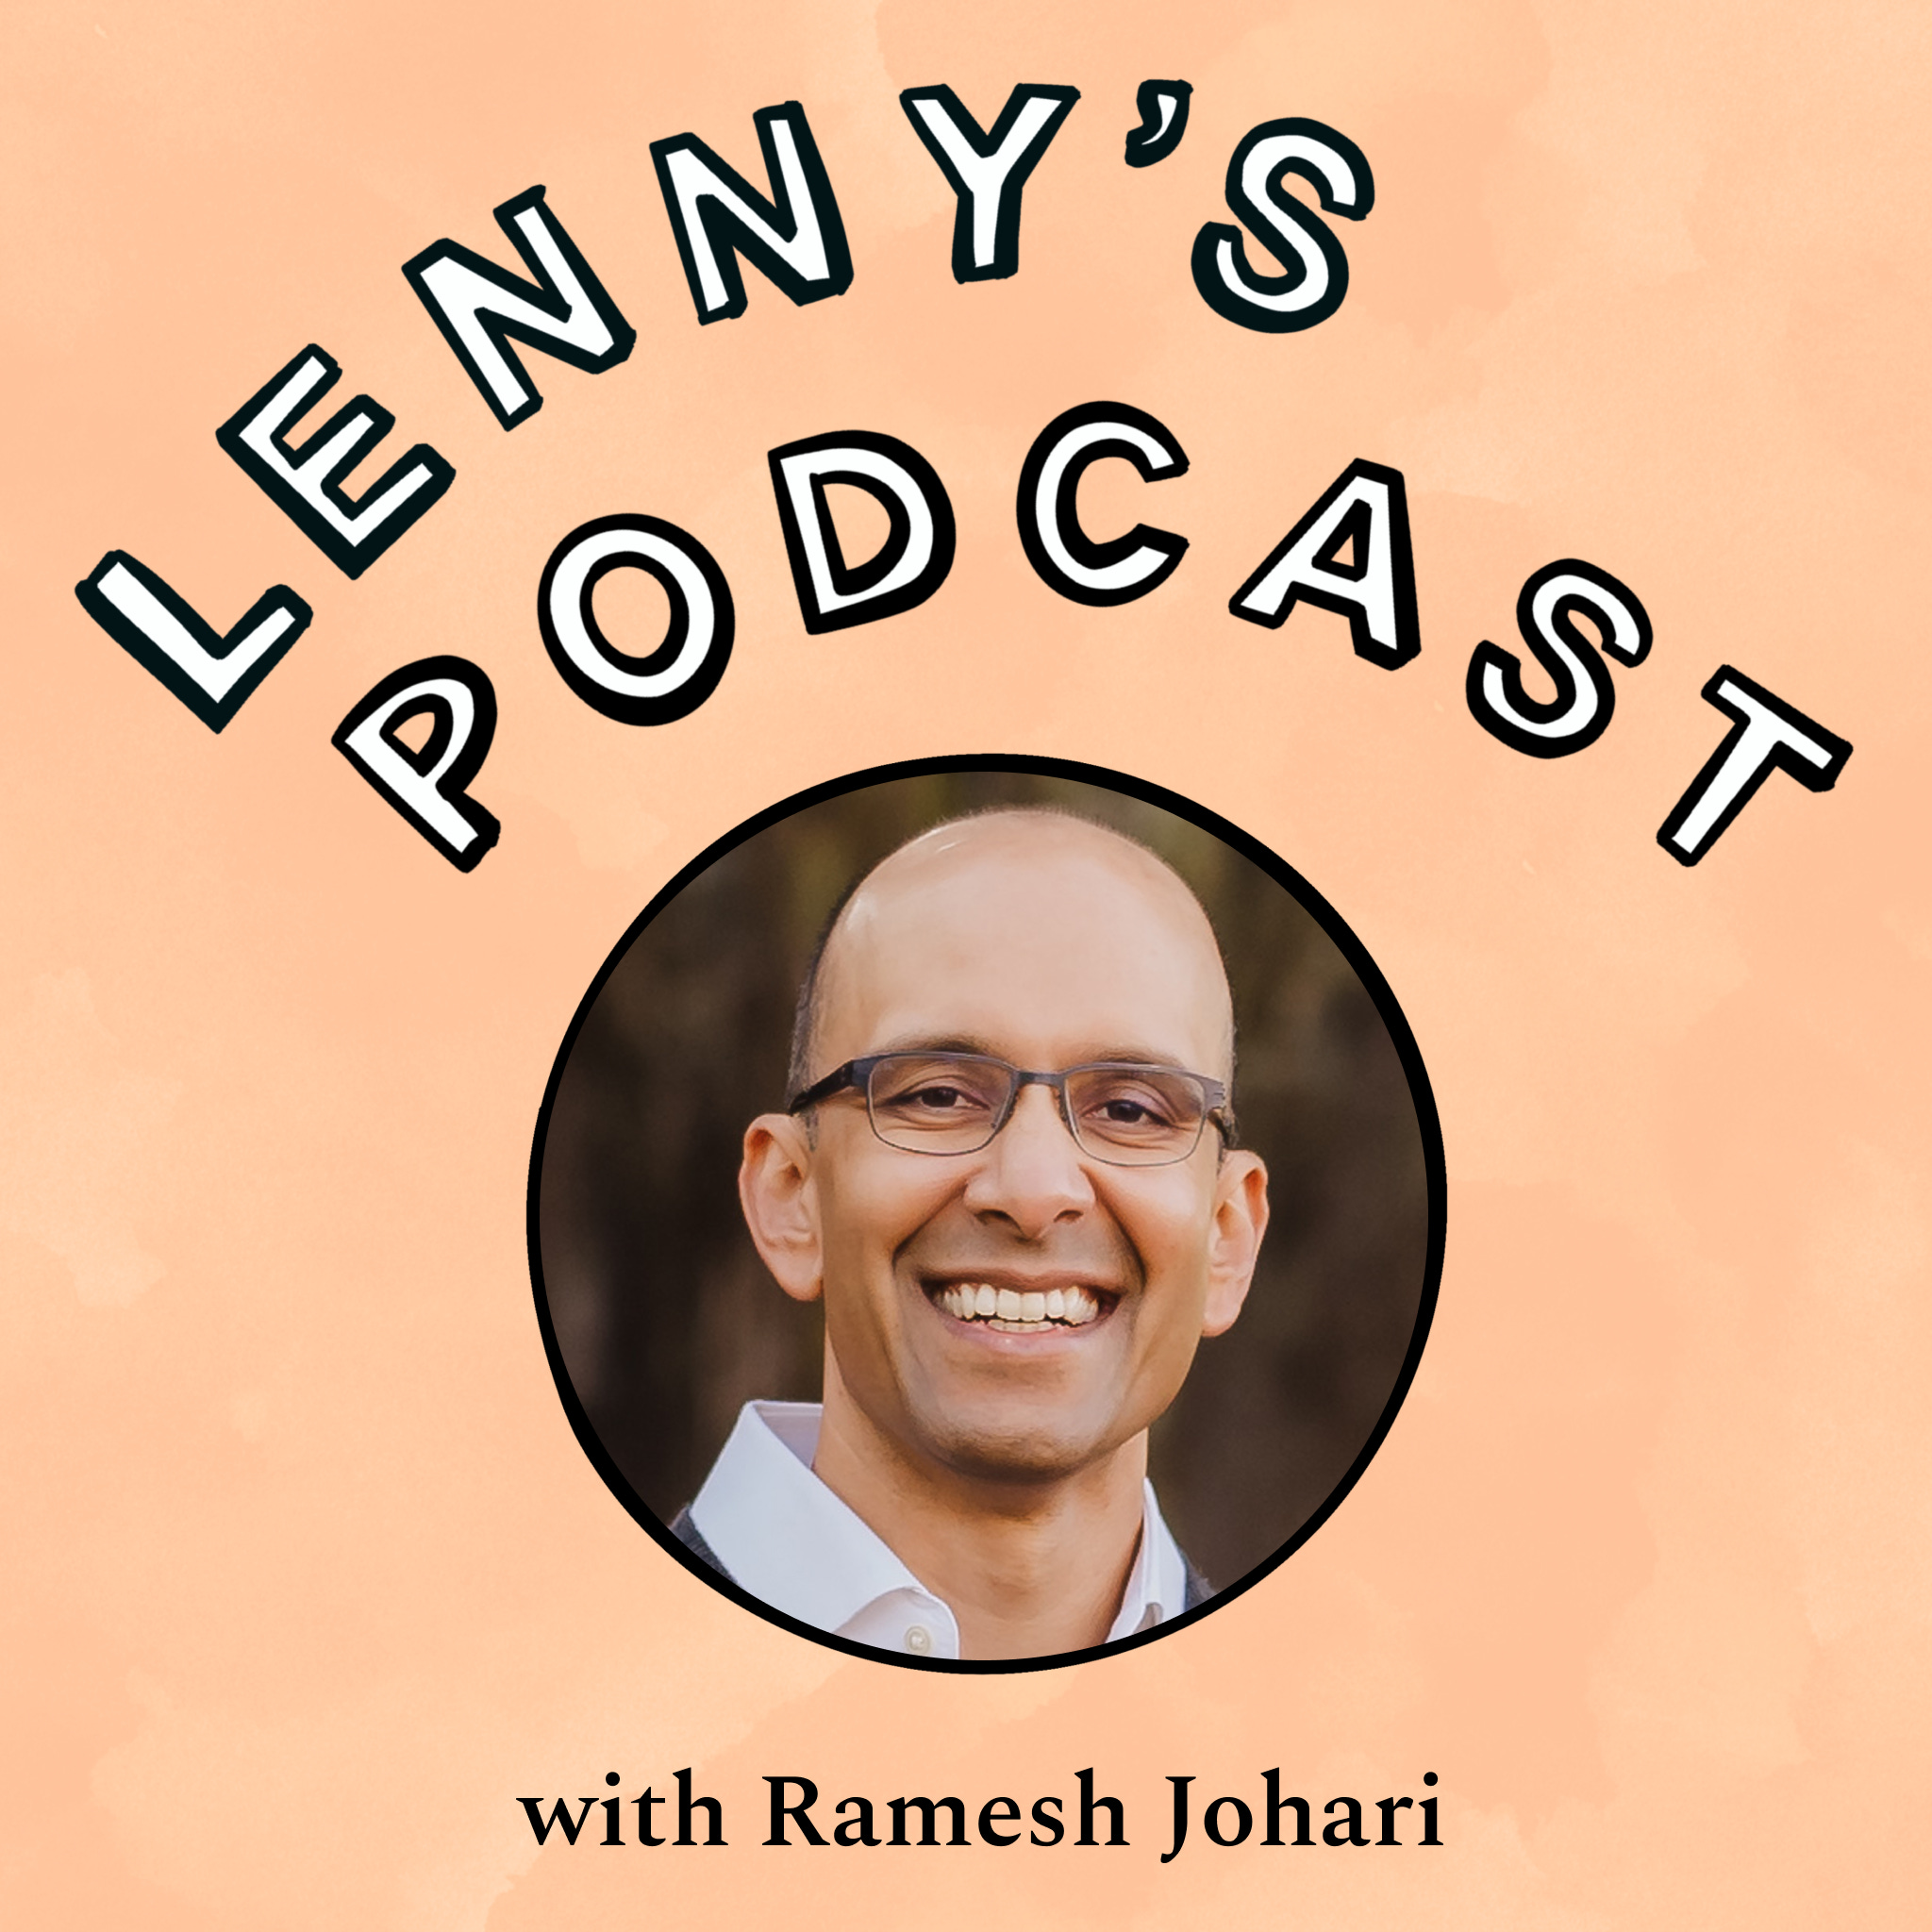 Marketplace lessons from Uber, Airbnb, Bumble, and more | Ramesh Johari (Stanford professor, startup advisor)